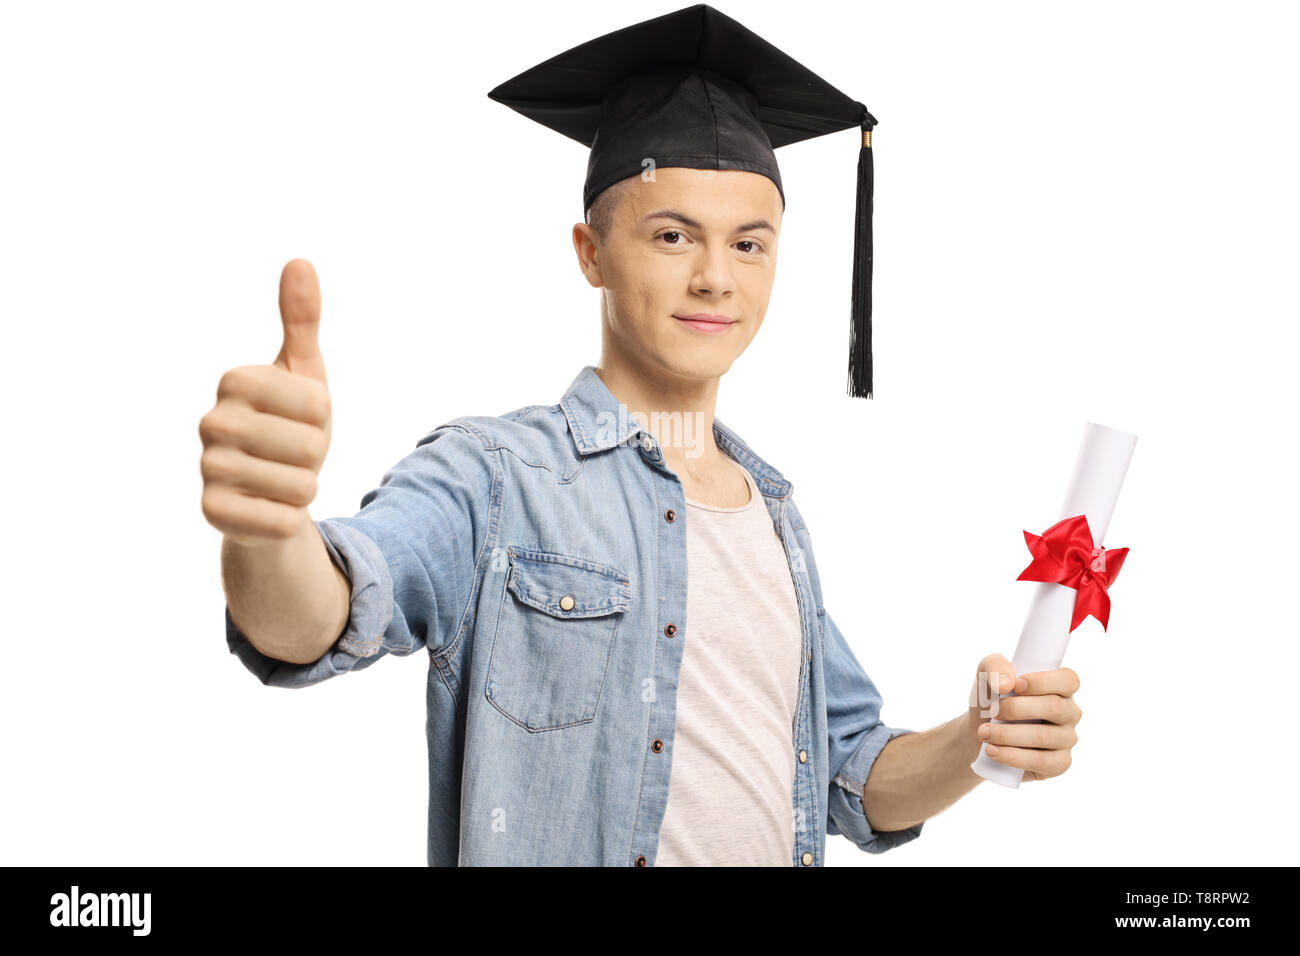 Male student with a graduation cap and diploma showing thumbs up isolated on white background Stock Photo